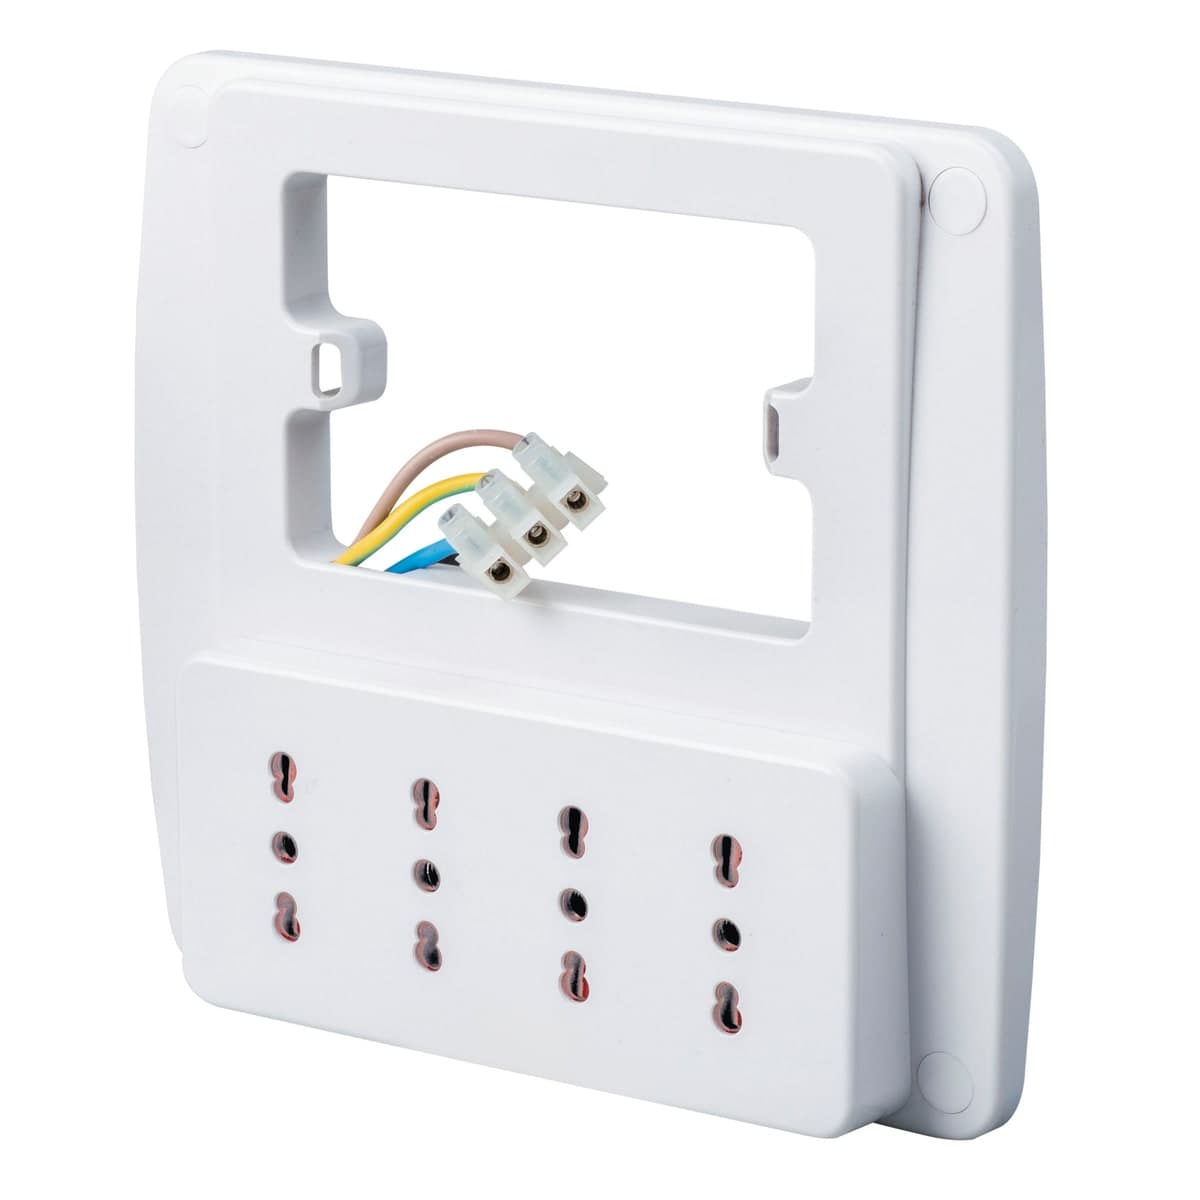 EMILIA SMART WALL SOCKET 4 SOCKETS 10/16A SUITABLE FOR 3-PIN BOX WHITE